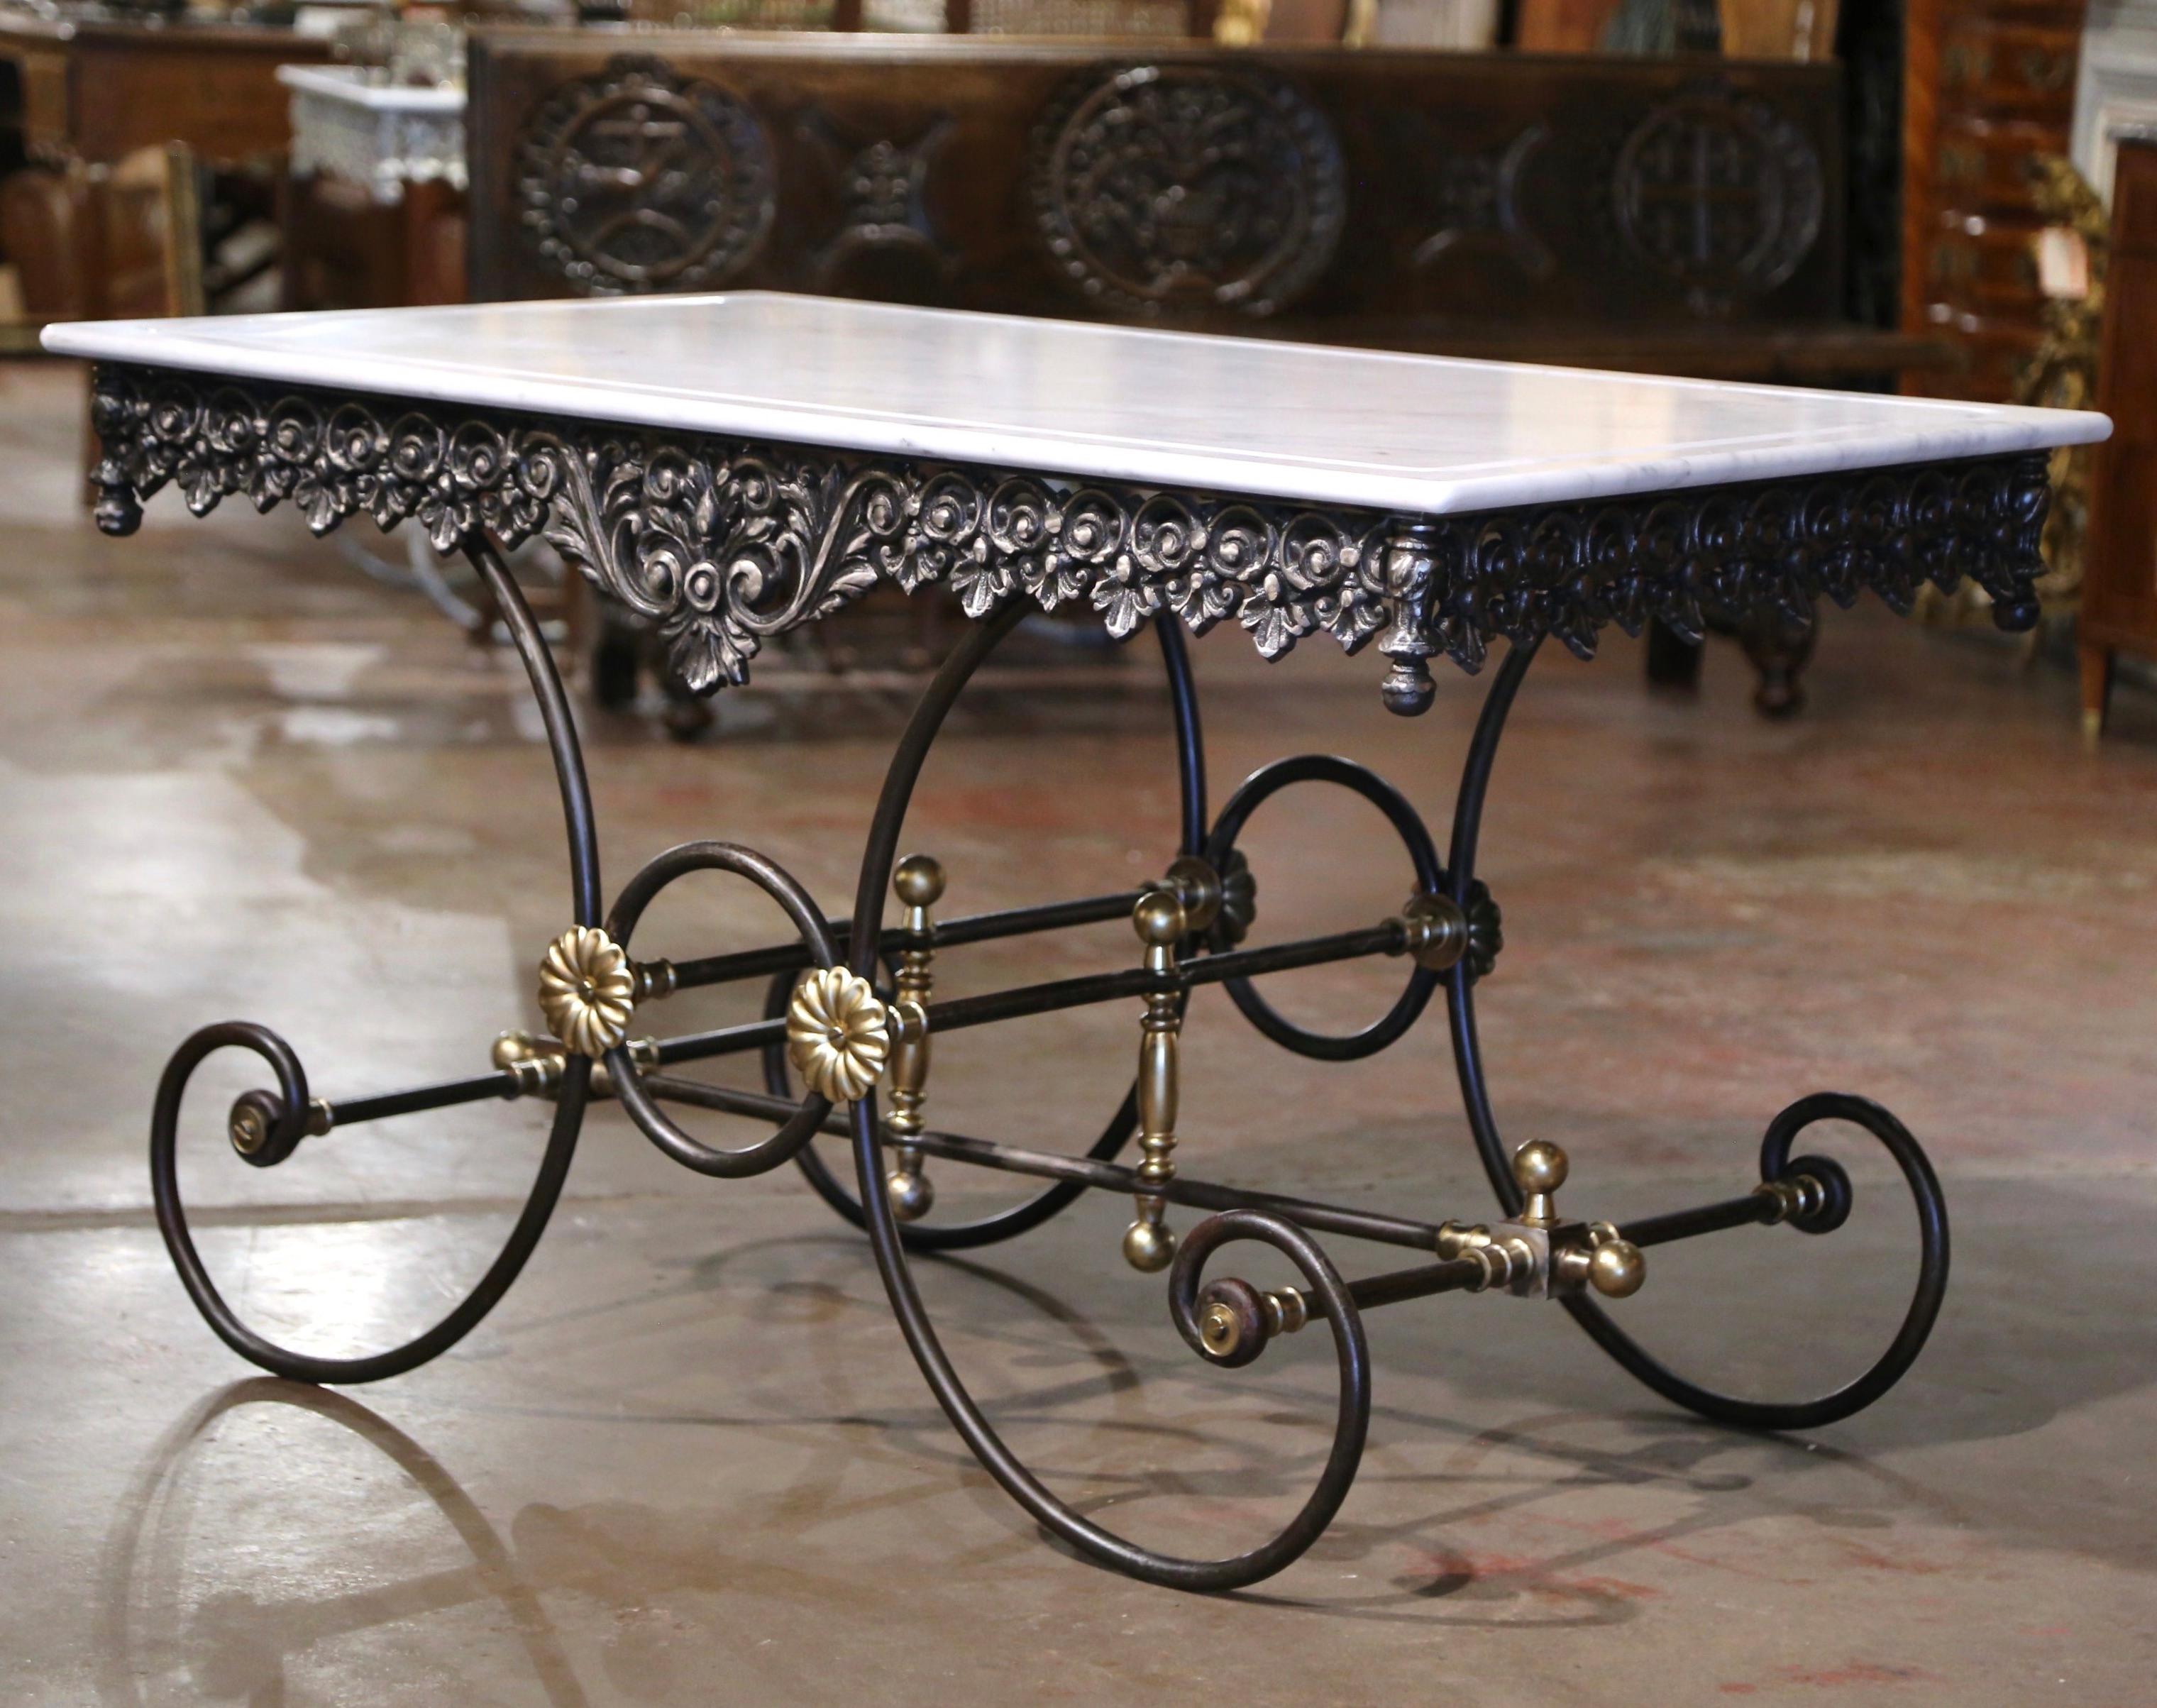 This large pastry table (or butcher table), would add the ideal amount of surface space to any kitchen. Crafted in France, the table stands on four scrolled legs over an intricate stretcher and decorative bronze rosettes and finials. The table